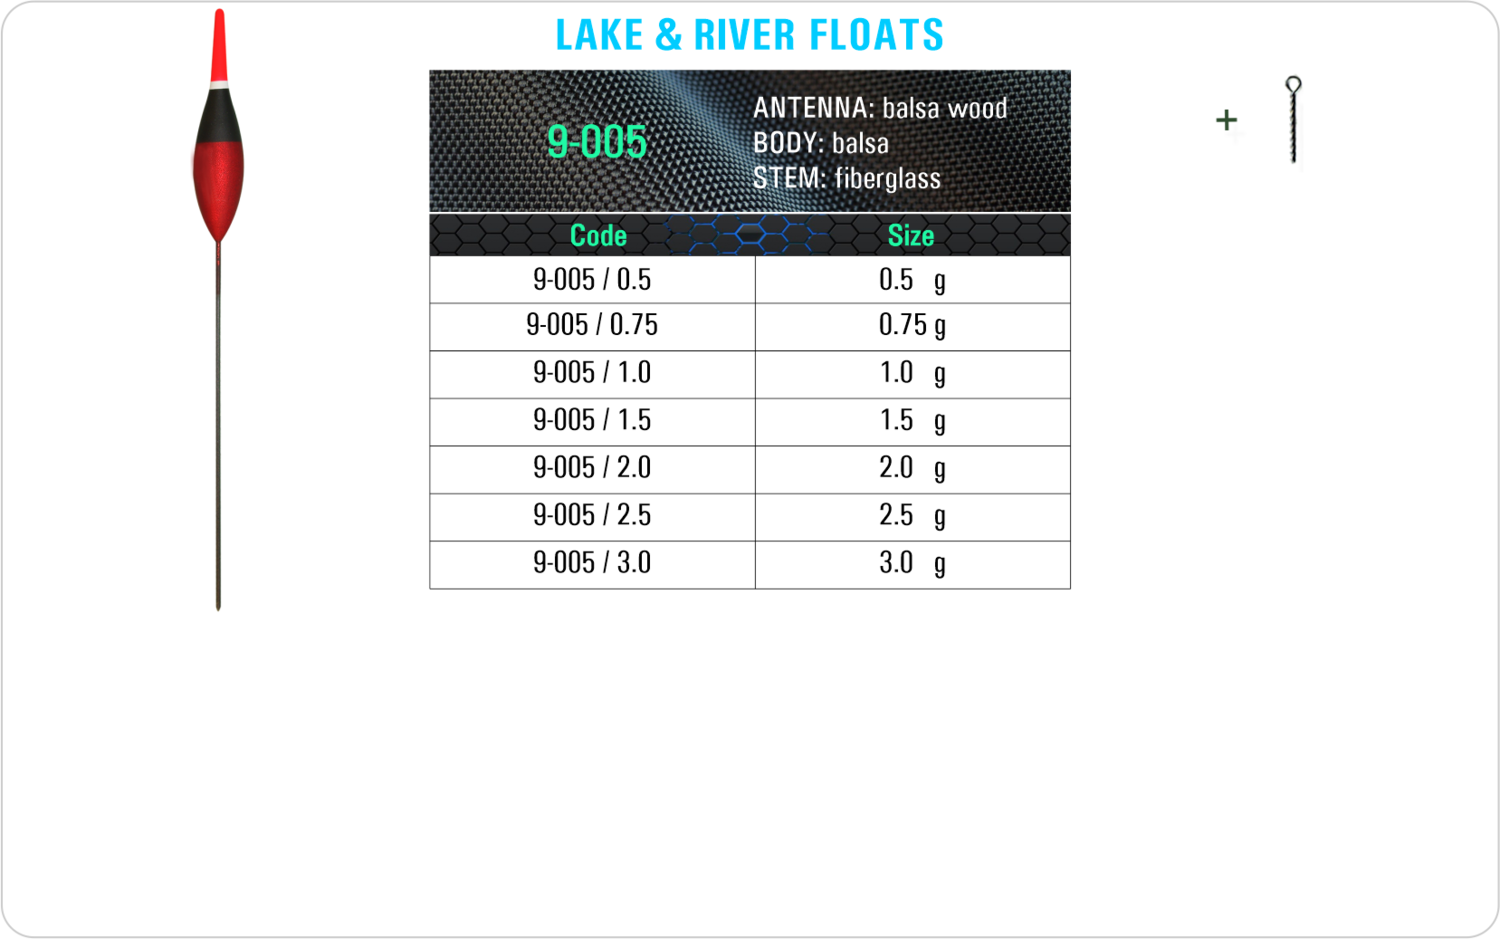 SF 9-005 Lake and river float model and table containing an additional information about this float with different codes, sizes, types of the body, the stem and the antenna of the float.